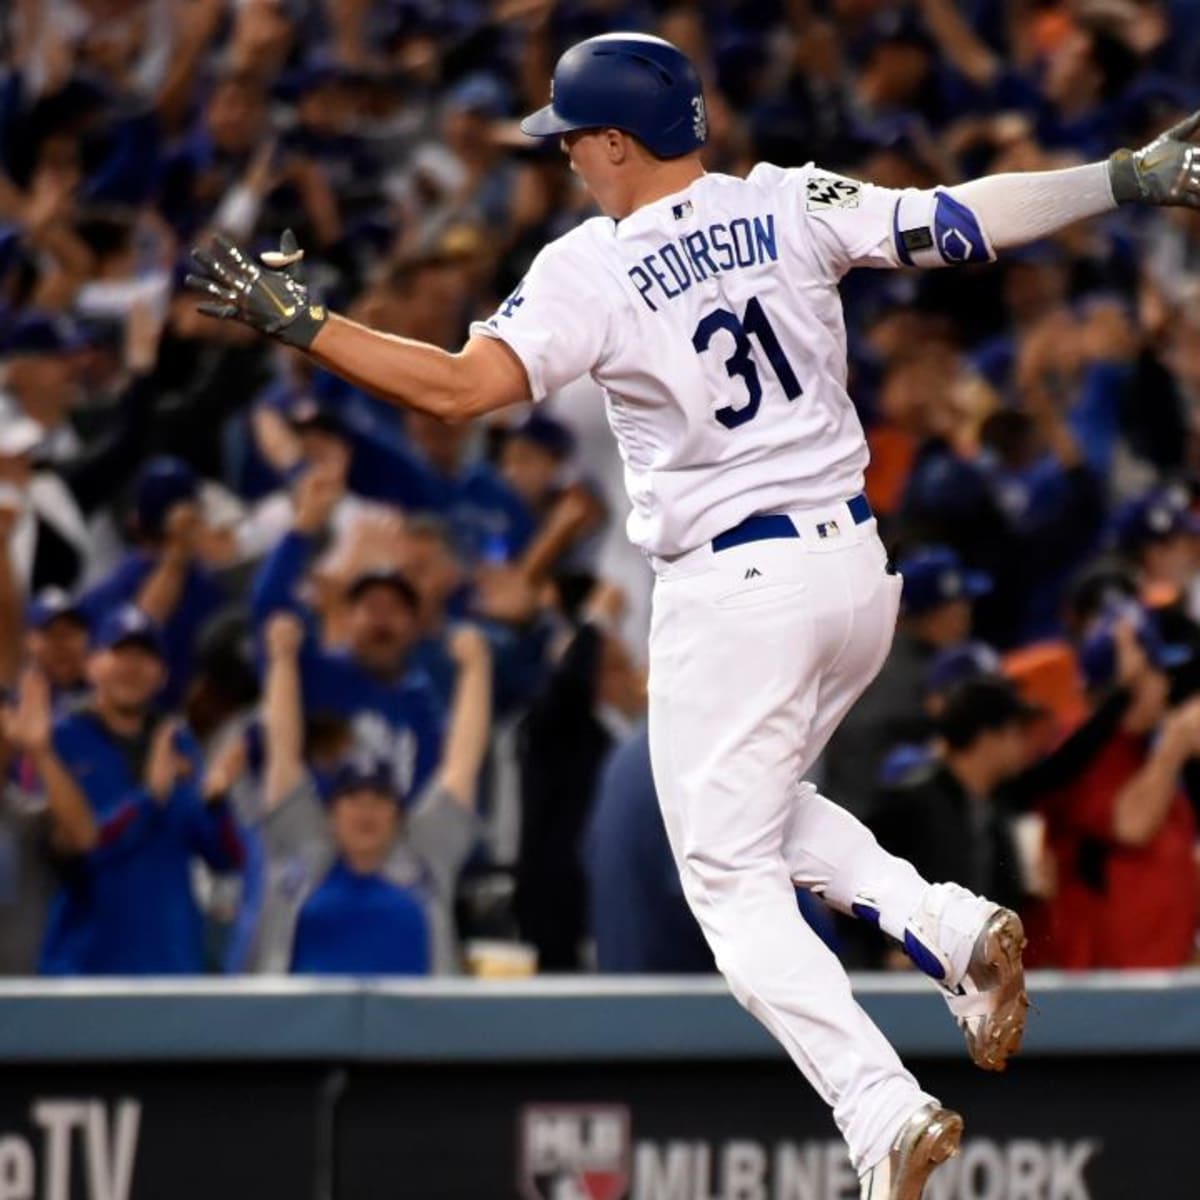 Dodgers Beat Astros 3-1 In Game 1 of The 2017 World Series